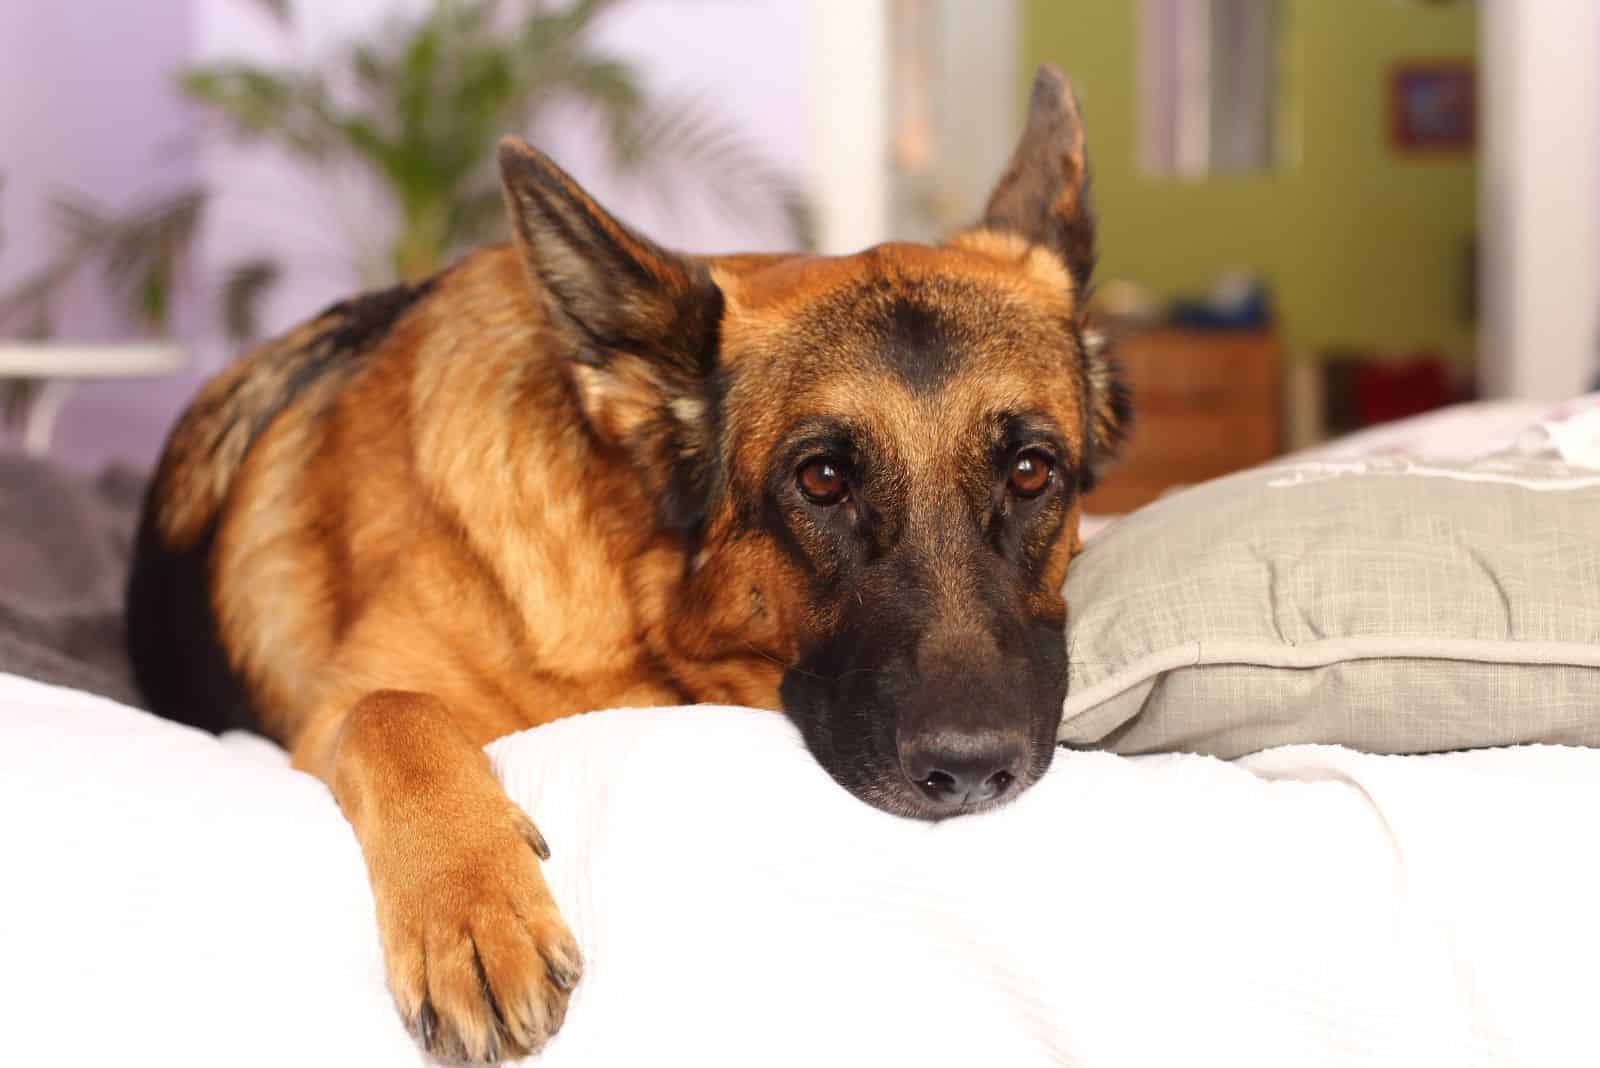 german shepherd lying on a pillow and looking at the camera